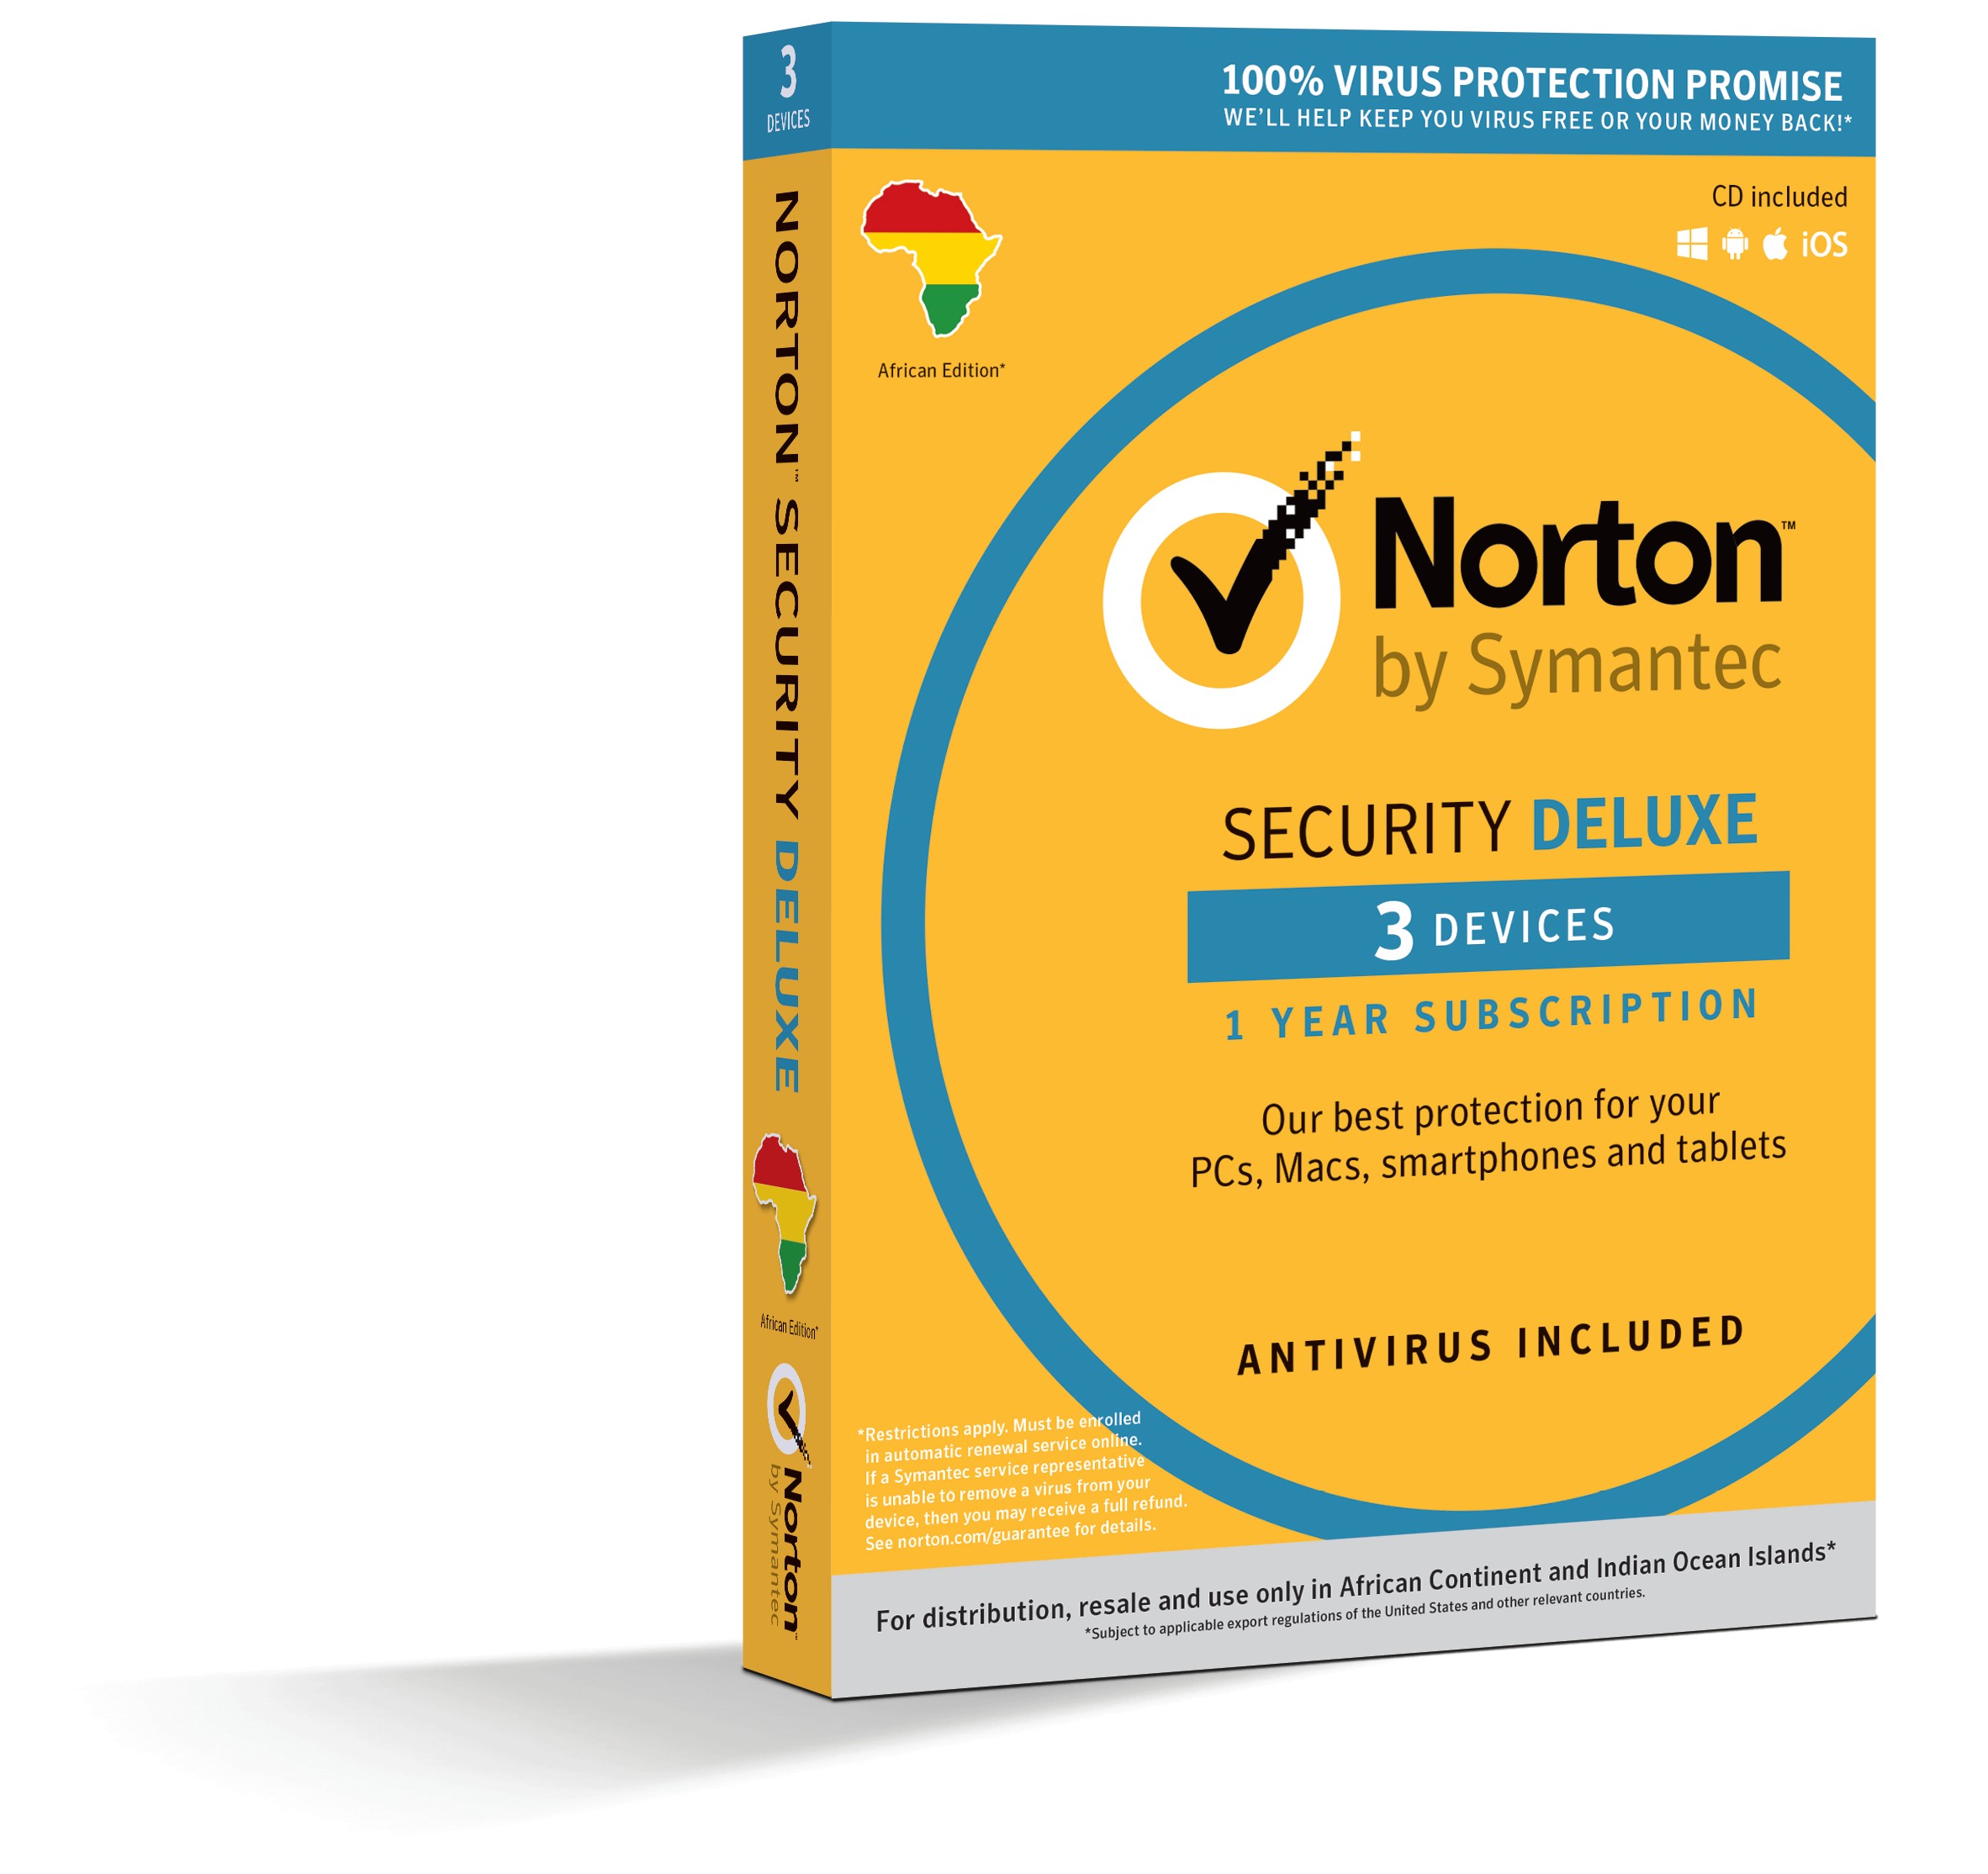 norton antivirus definitions out of date